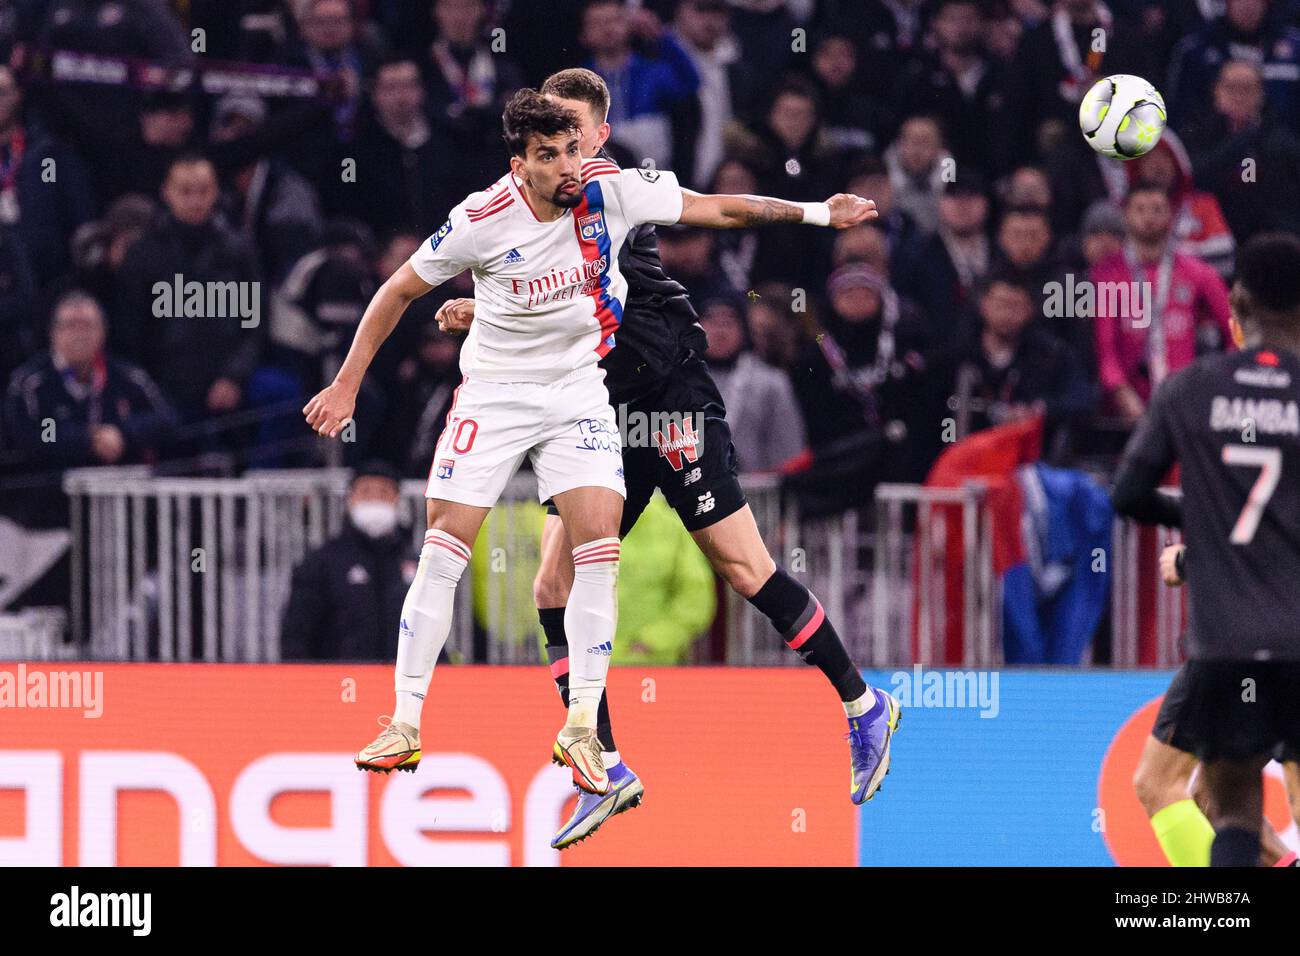 LYON, FRANCE - FEBRUARY 27: Lucas Paquetá of Lyon (L) heads the ball during  the Ligue 1 Uber Eats match between Olympique Lyonnais and Lille OSC at  Groupama Stadium on February 27,